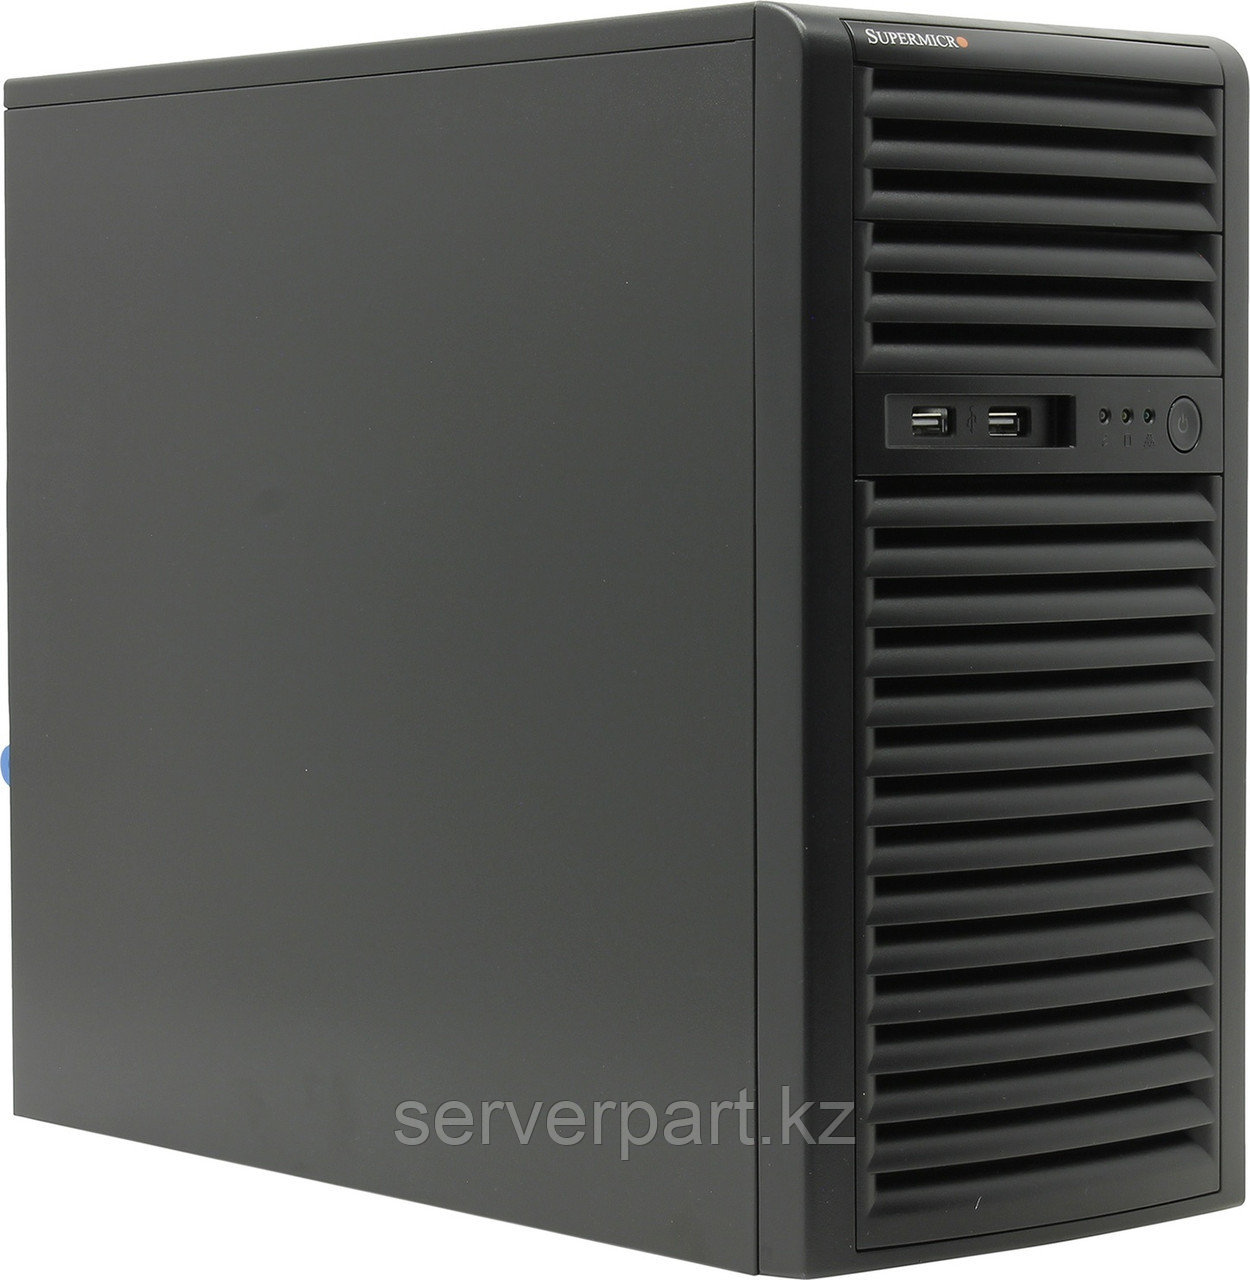 Сервер Supermicro SYS-5039C Tower 4LFF/4-core intel xeon E2124 3.3GHz/24GB EUDIMM/no HDD up-to 4